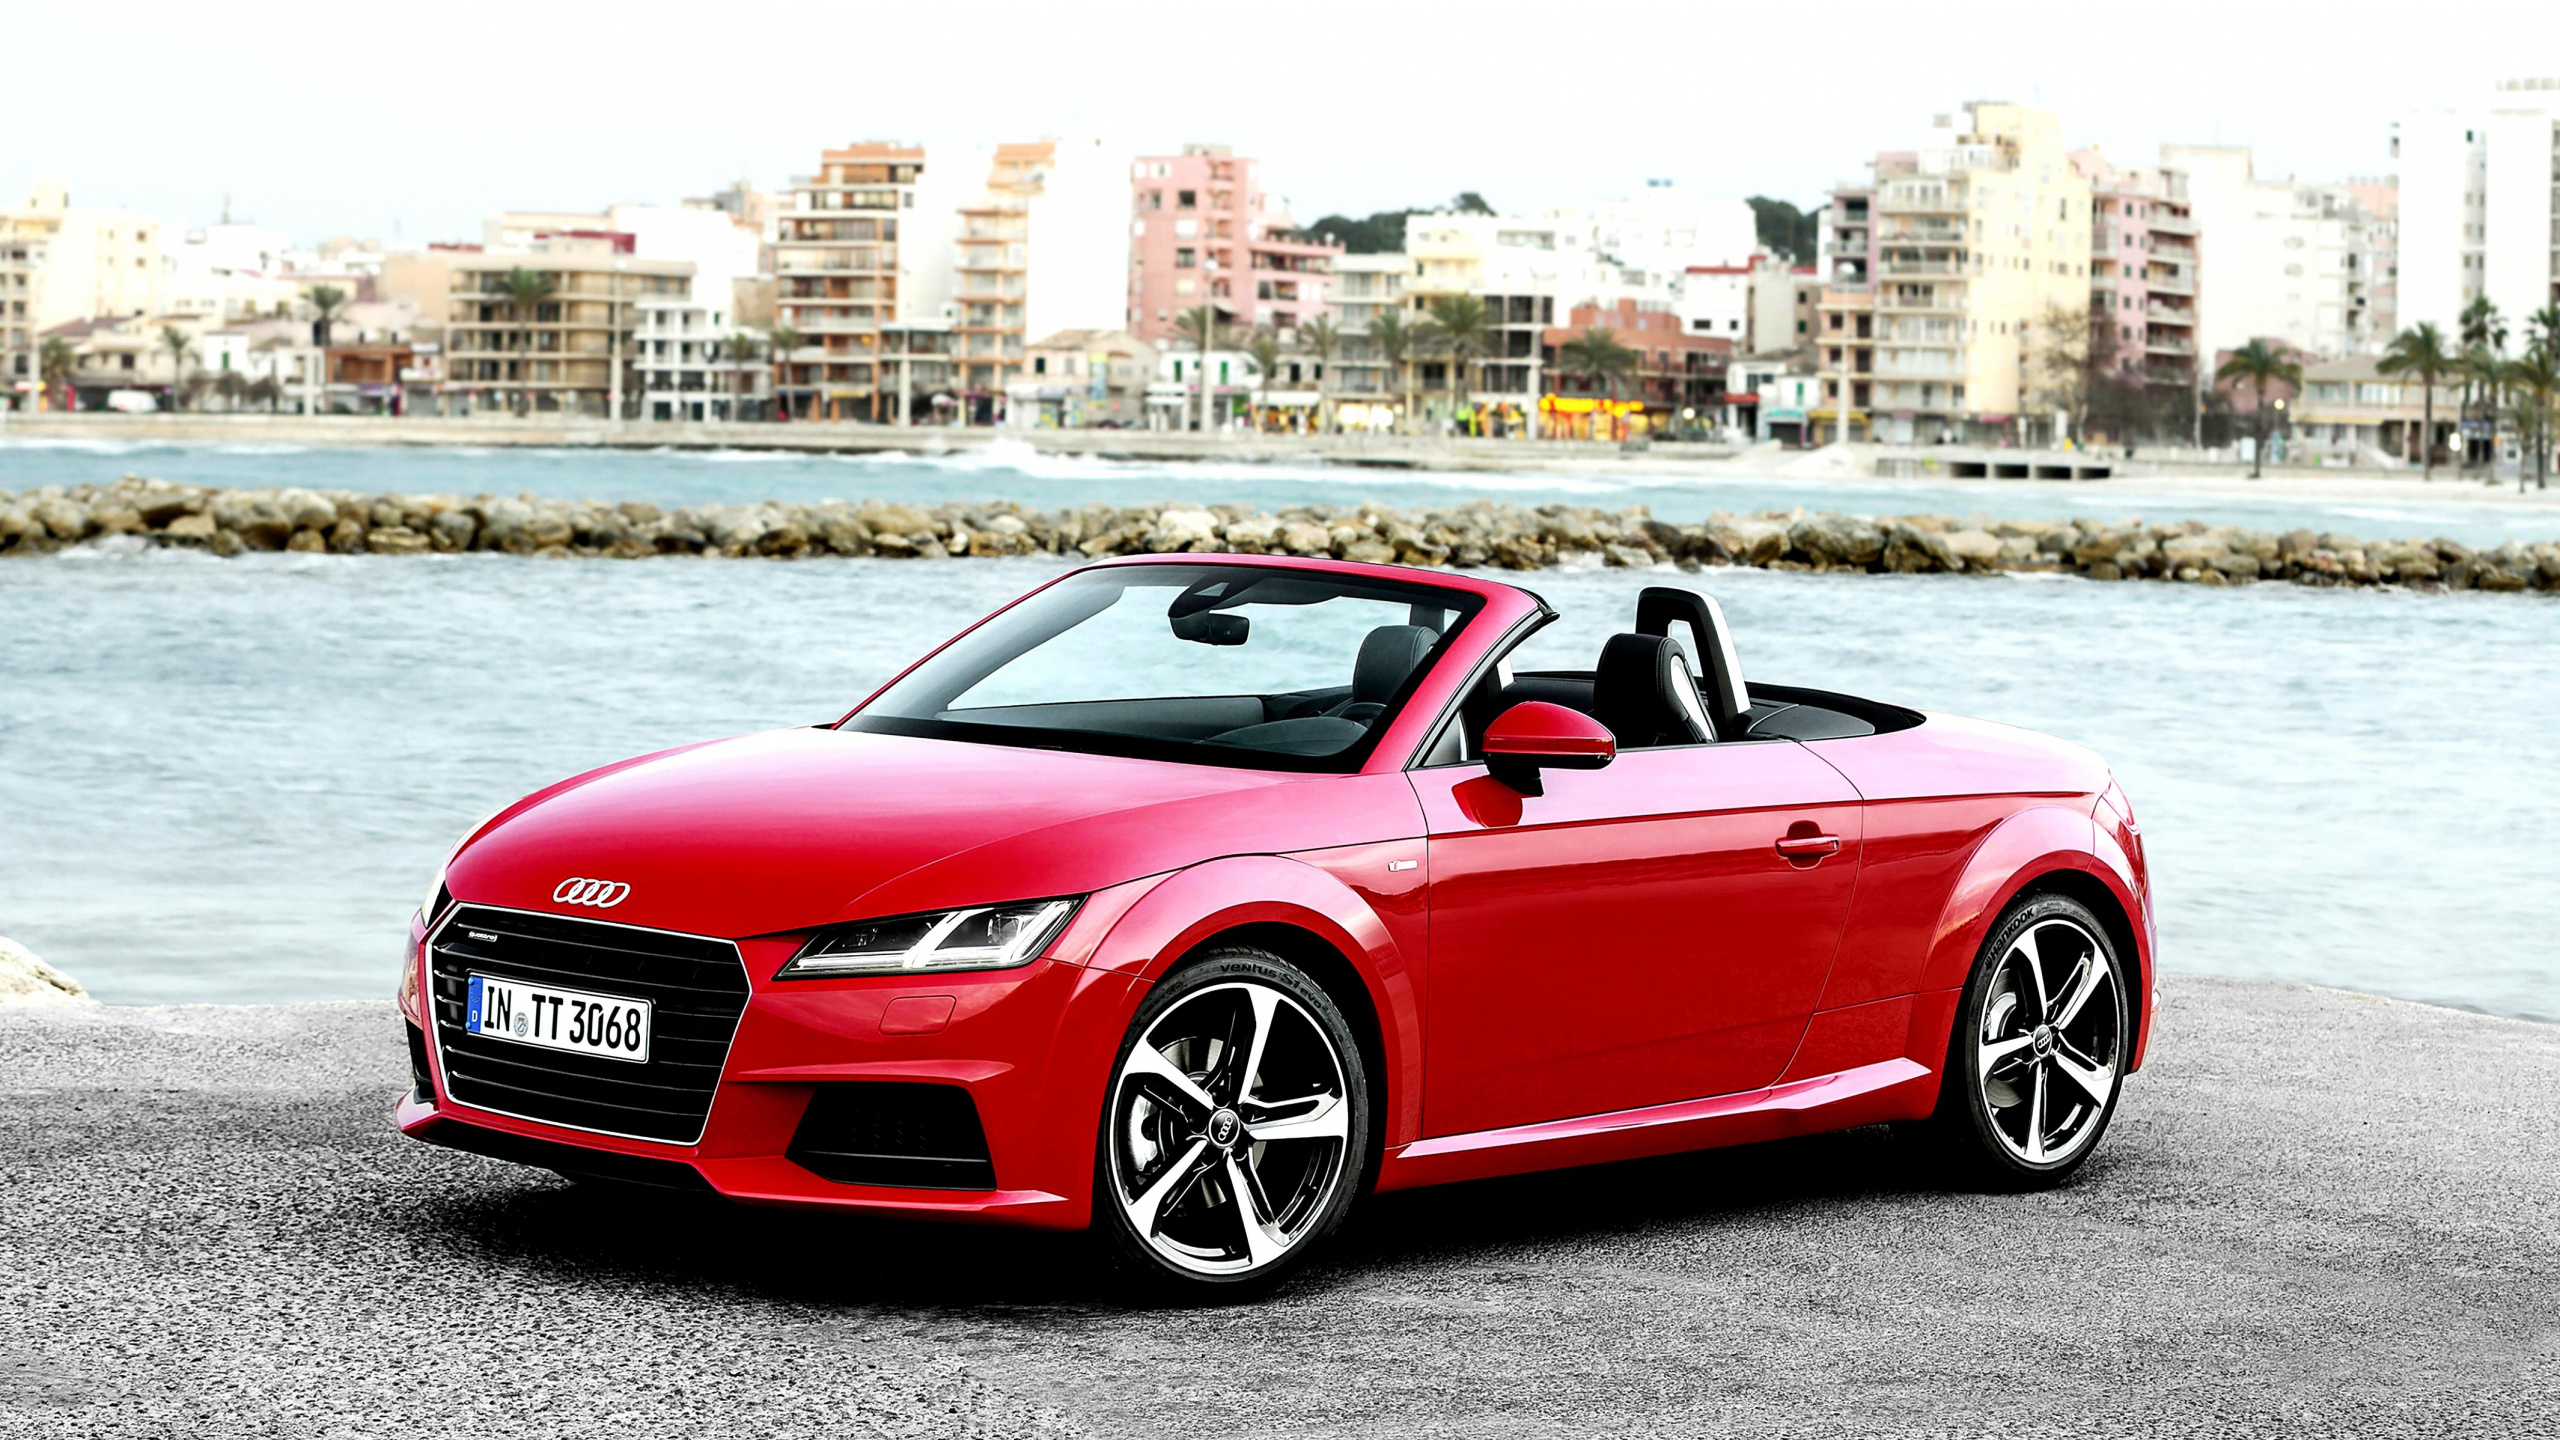 Red Convertible Car Parked Near Body of Water During Daytime. Wallpaper in 2560x1440 Resolution